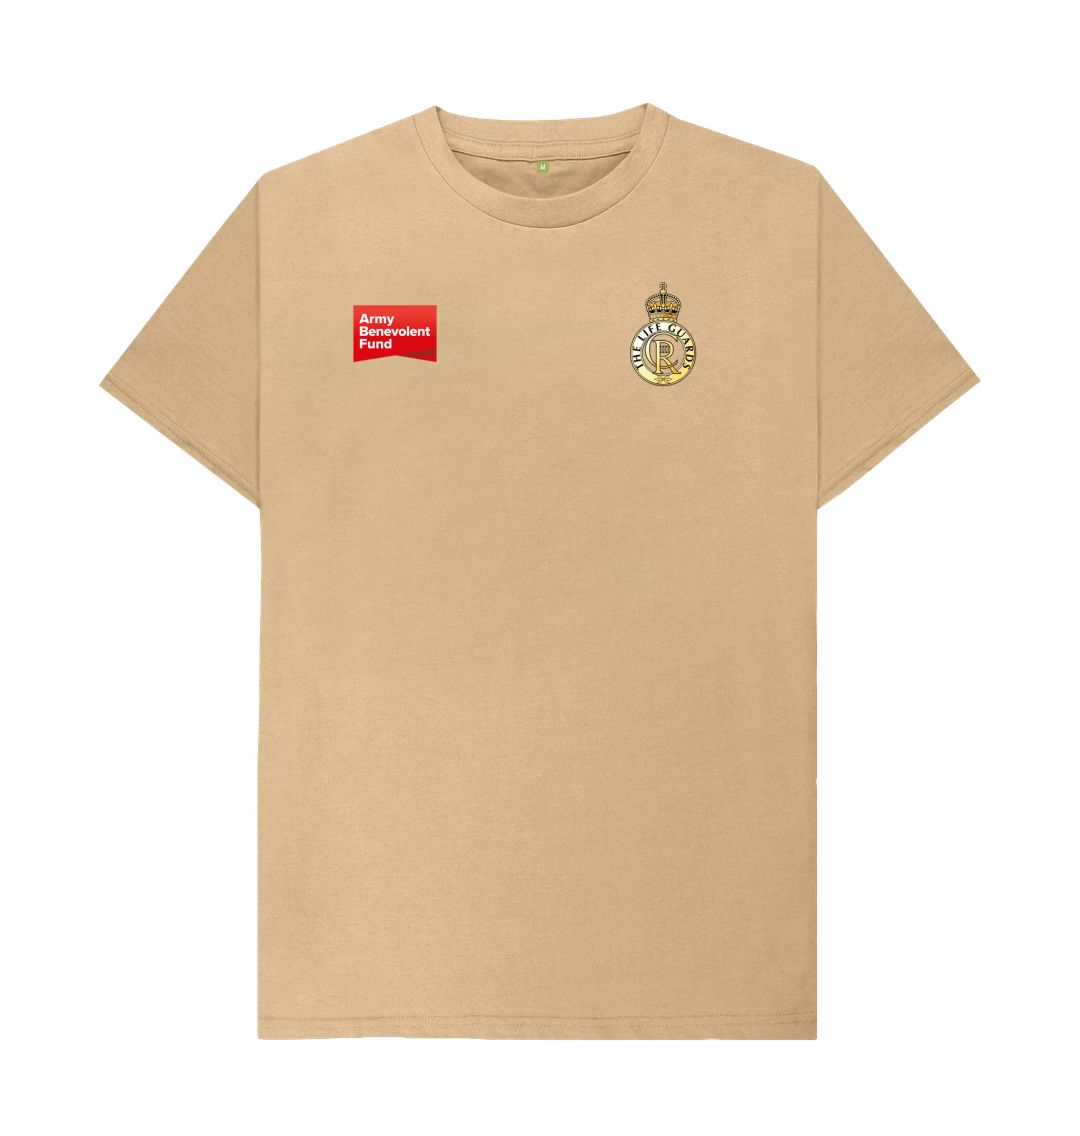 The Life Guards Unisex T-shirt - Army Benevolent Fund